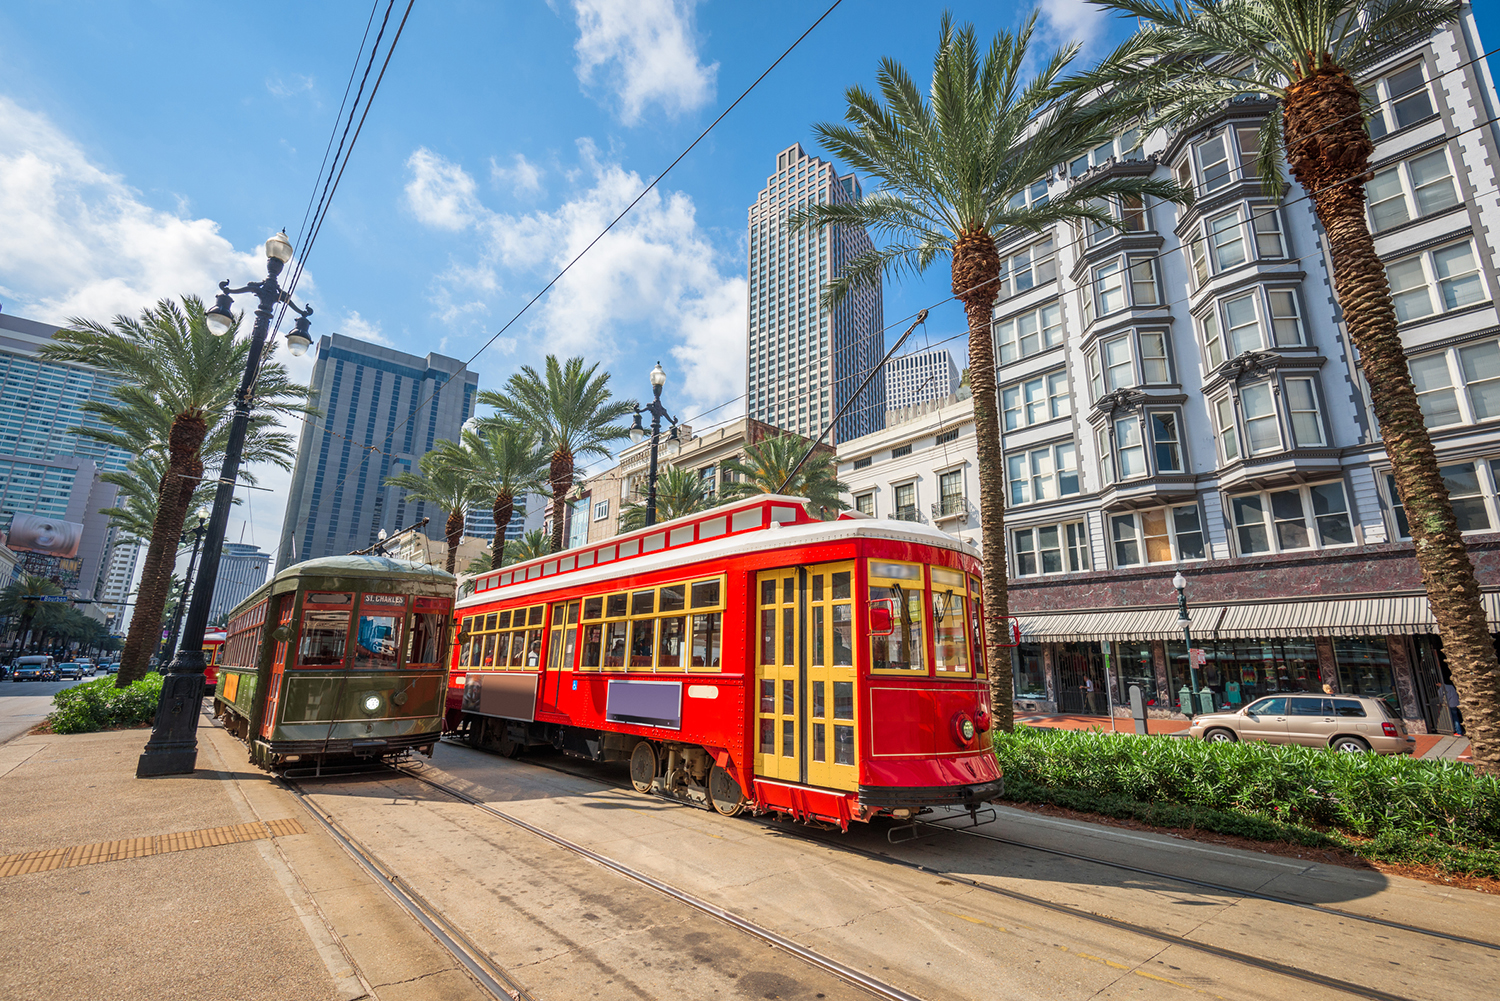 A bright red streetcar in New Orleans.